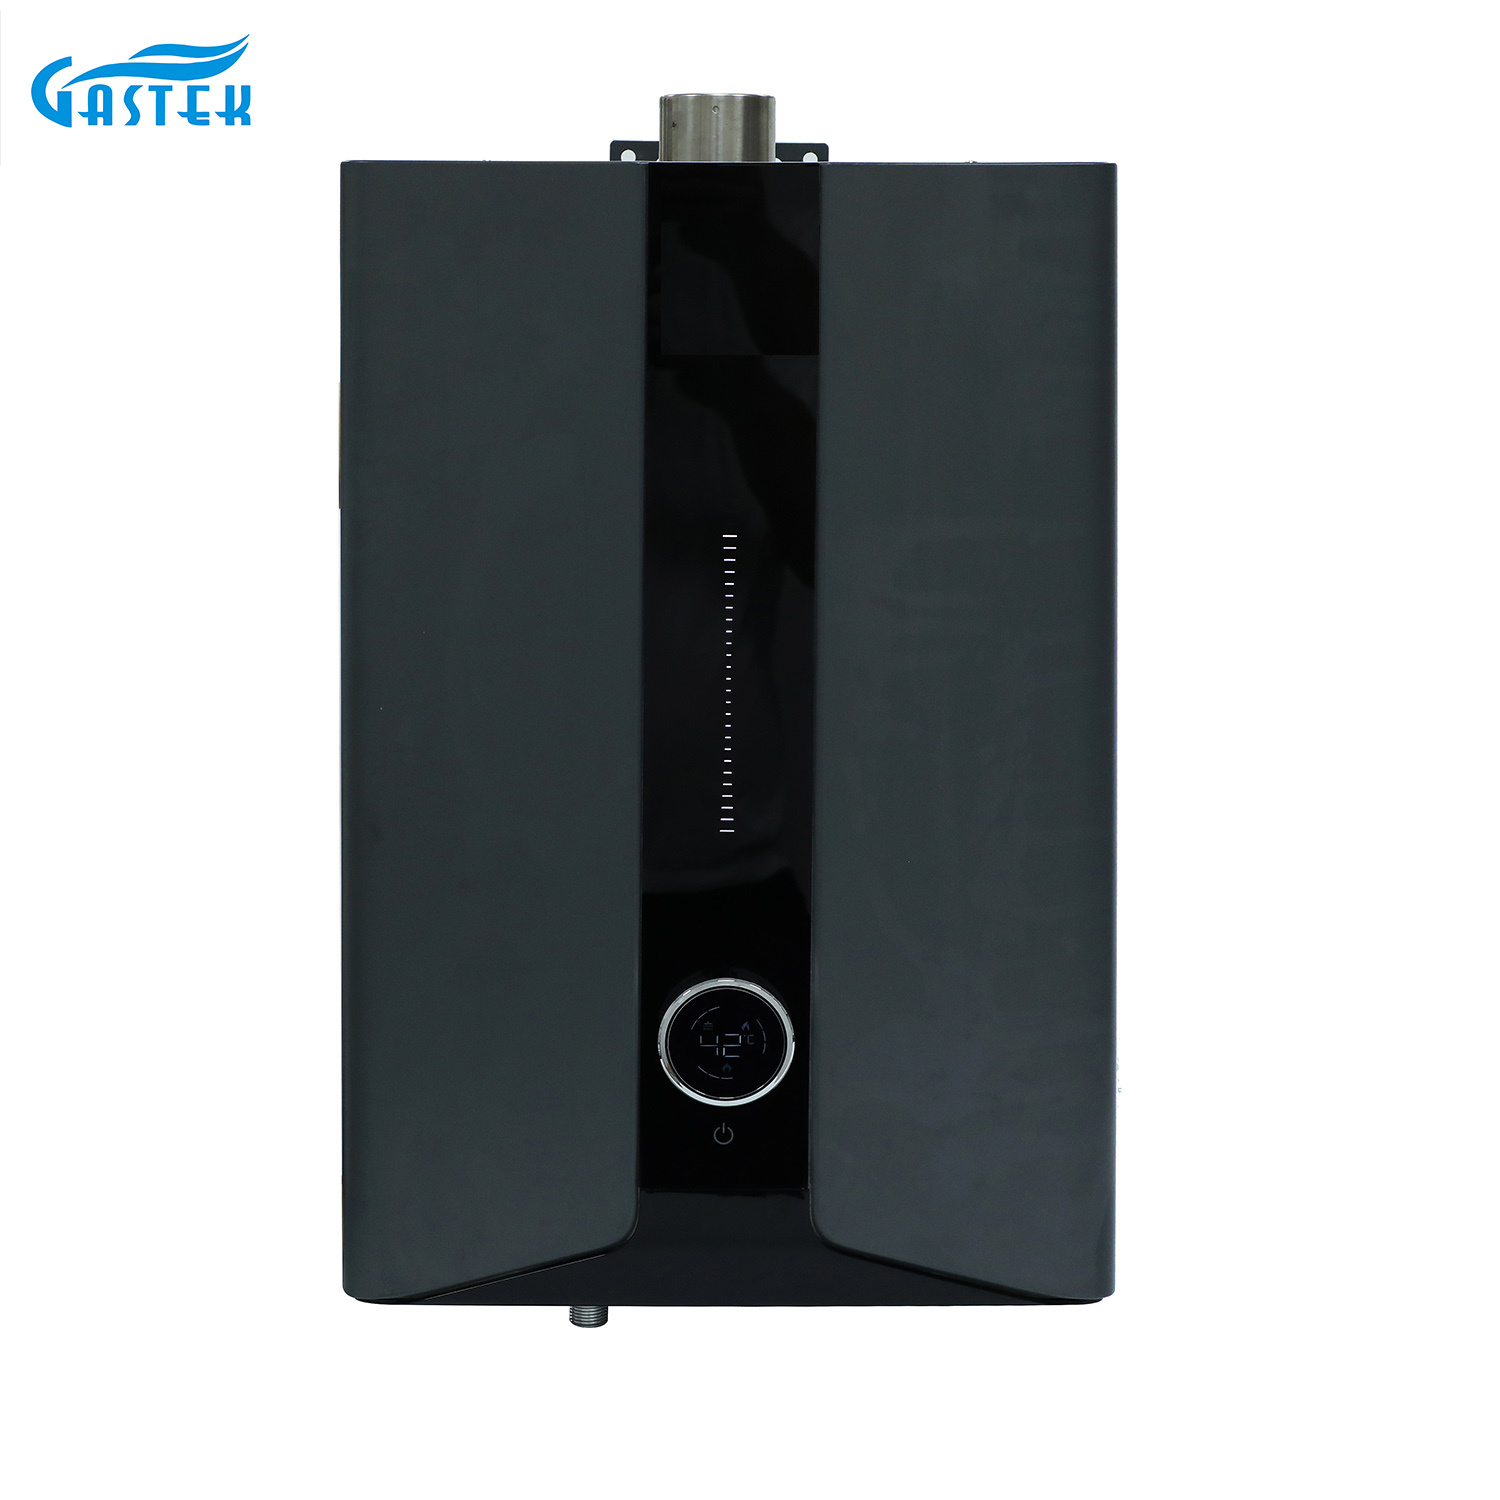 LCD Screen Display Constant Temperature Forced Type Gas Water Heater for Bathing